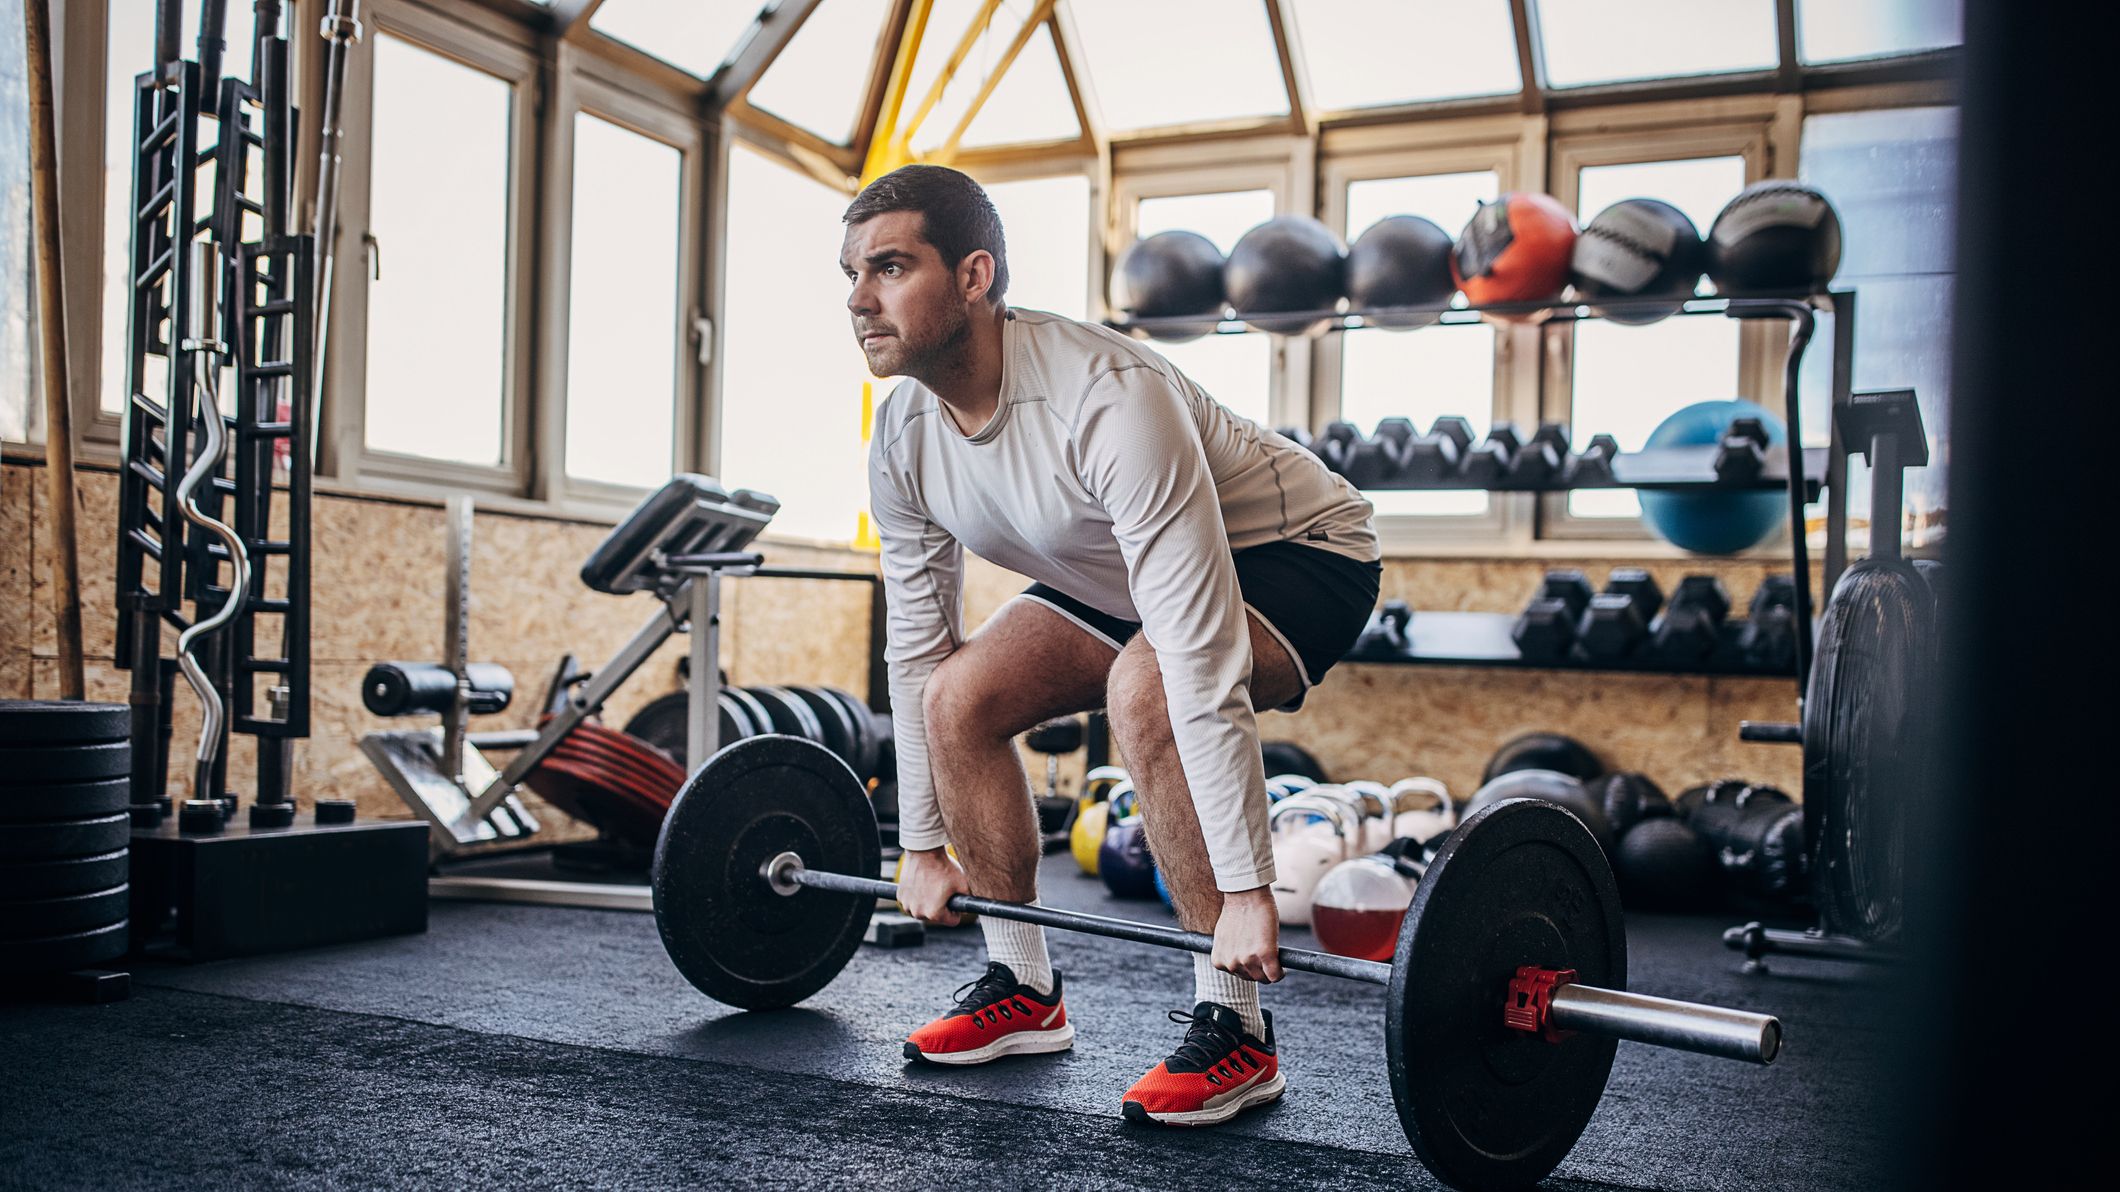 Beginner's Guide to Weight Training to Build Muscle and Strength